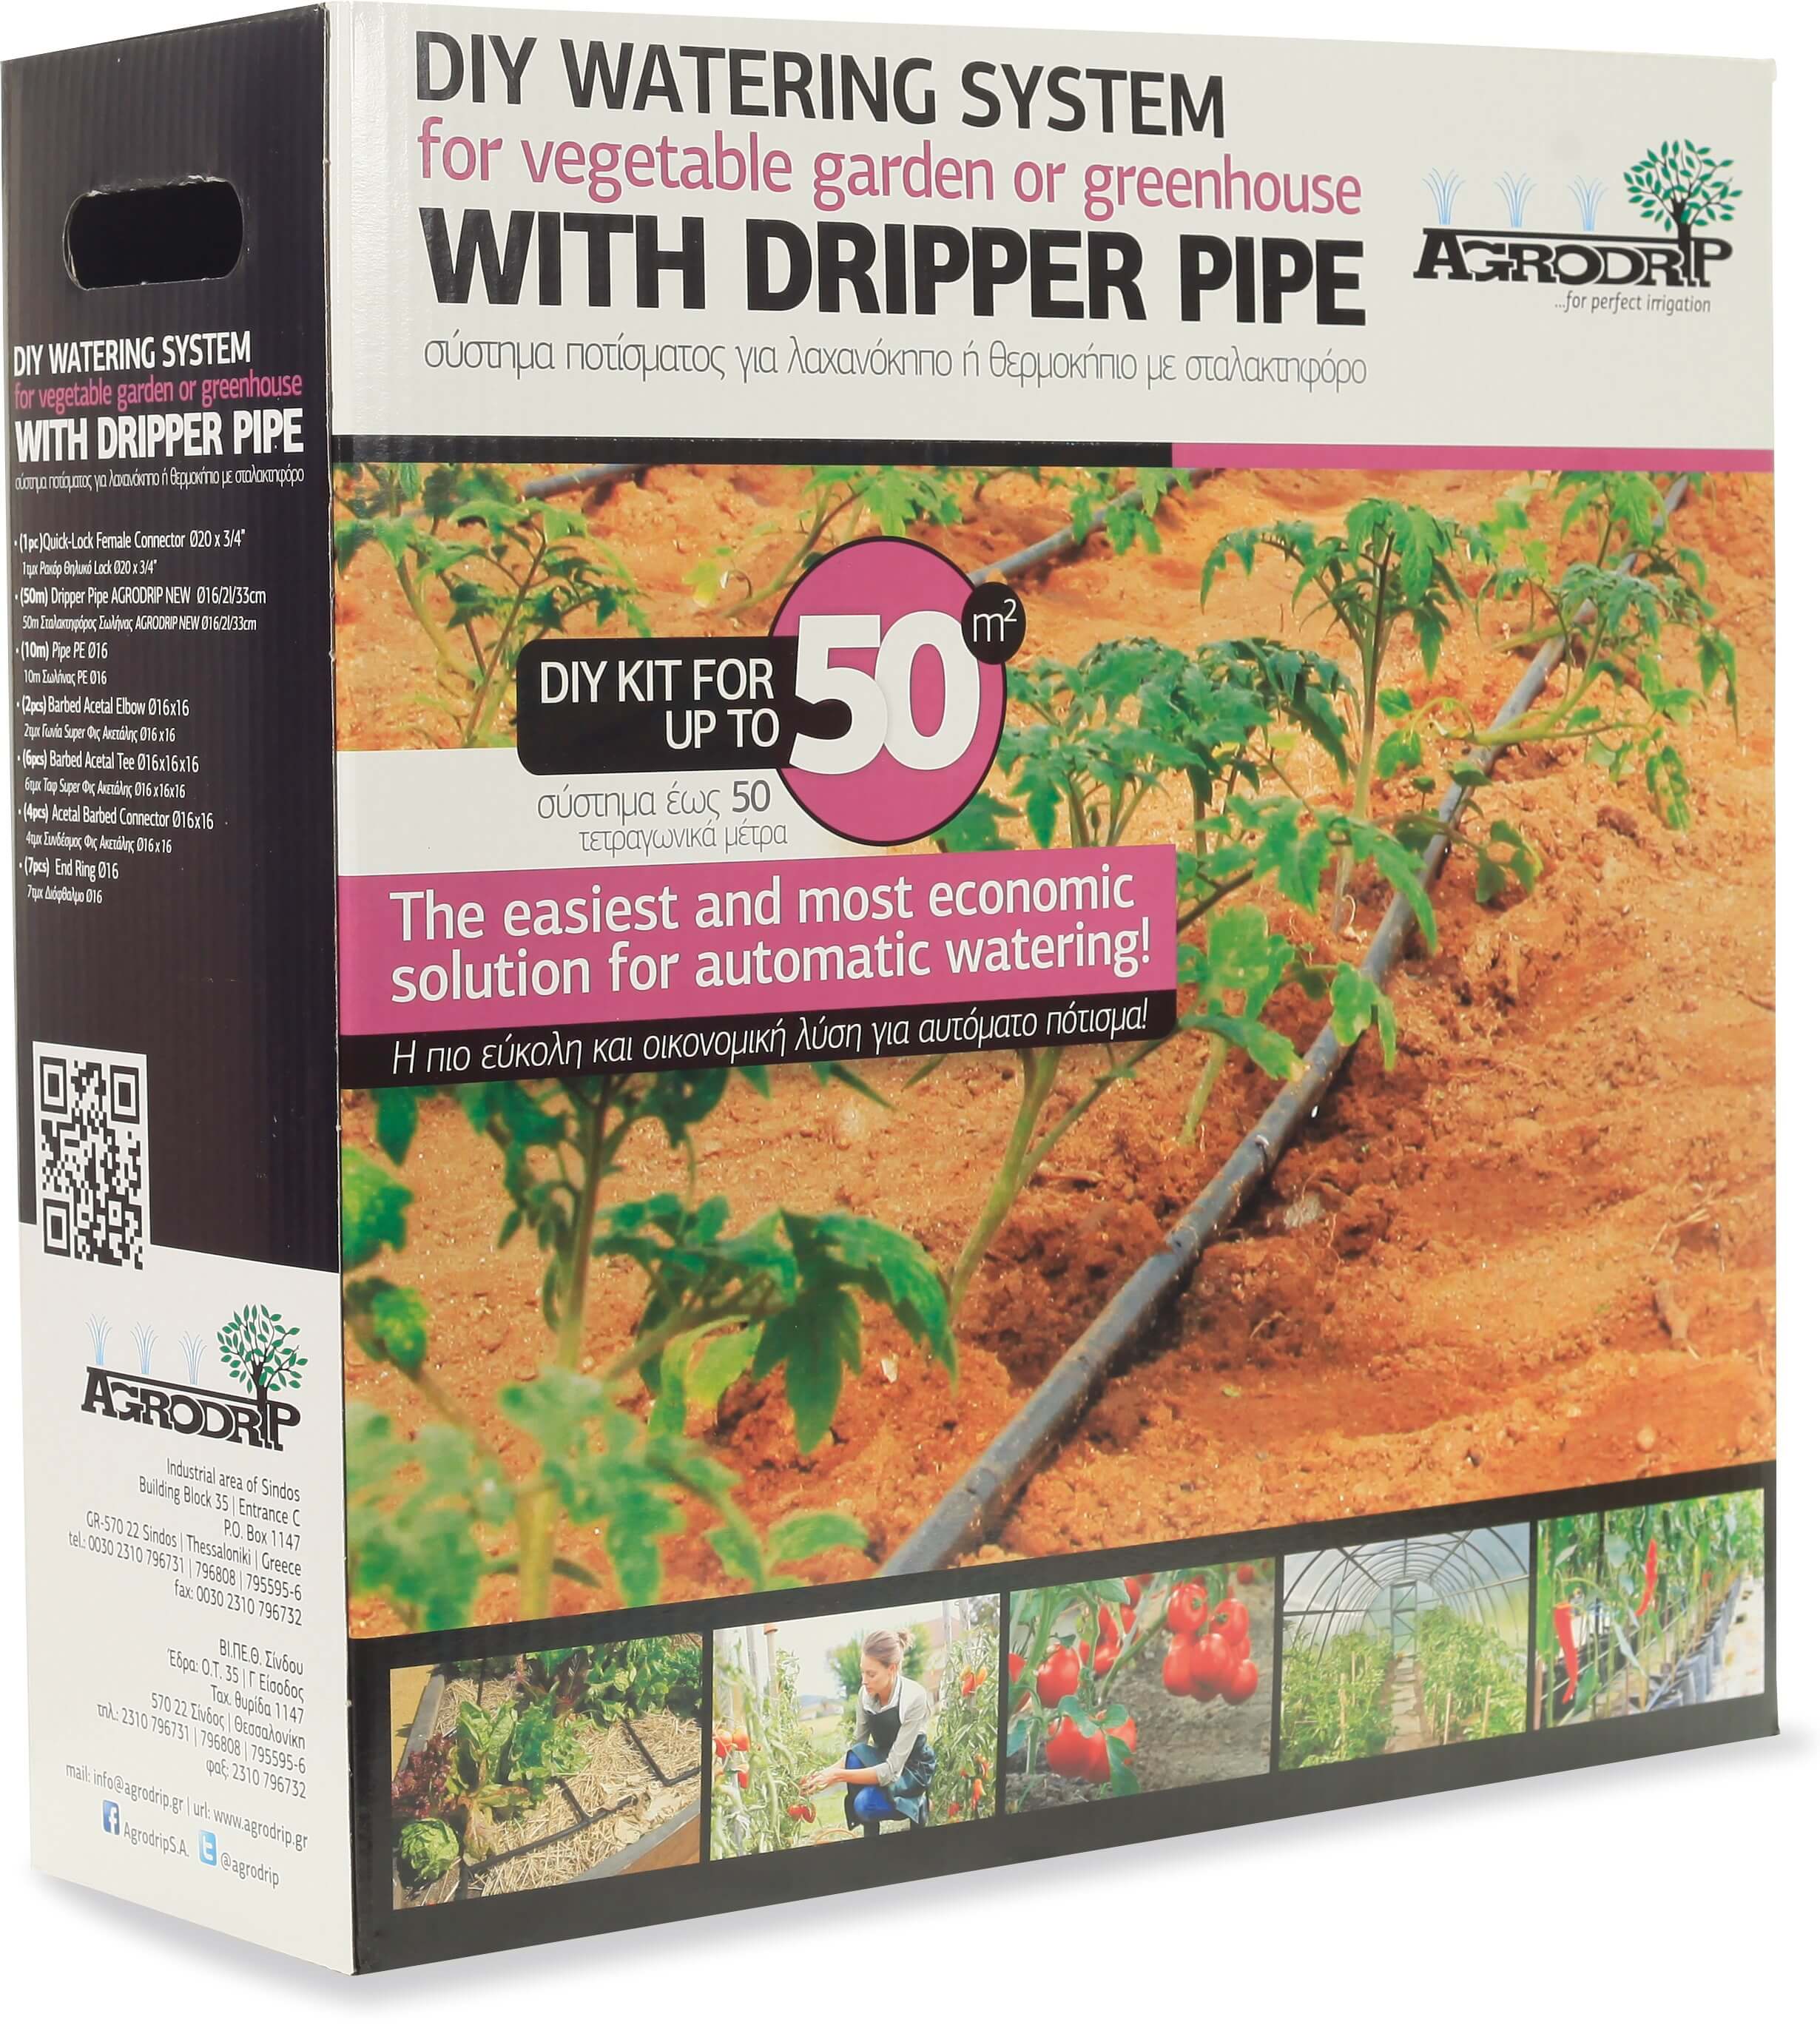 Agrodrip DIY watering system for vegetable garden or greenhouse up to 50m2 with dripper pipe